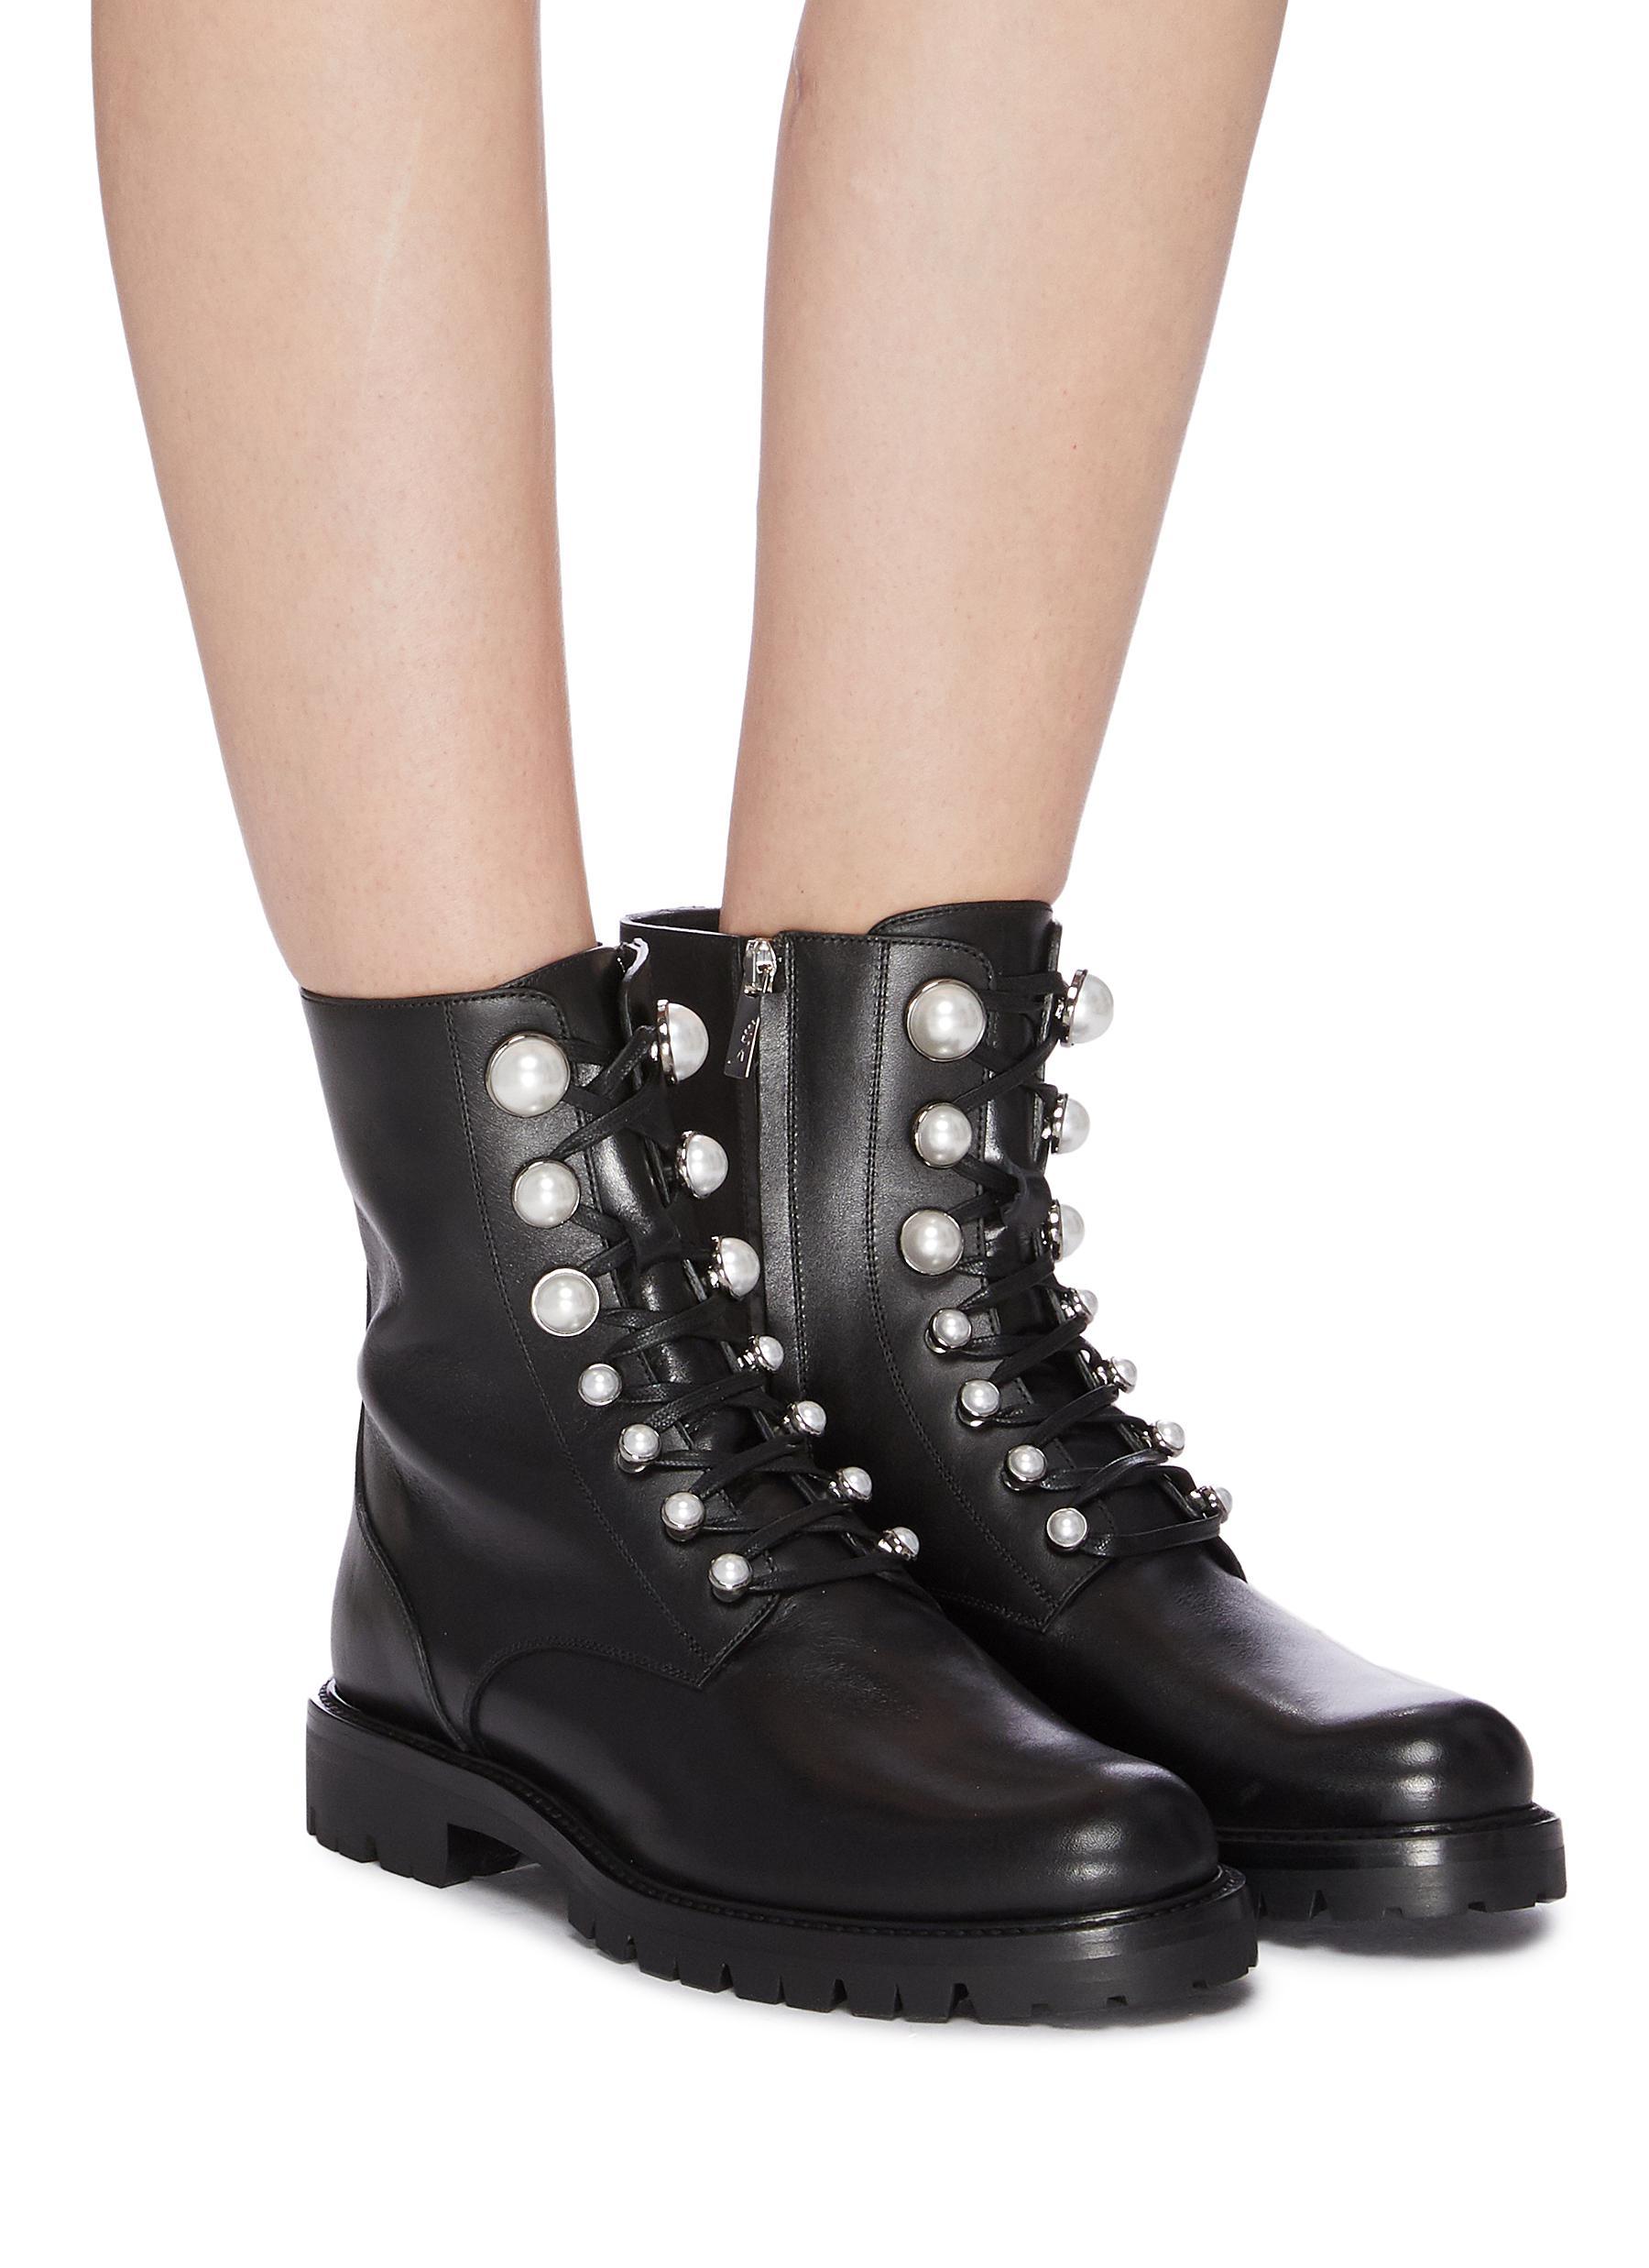 Rene Caovilla Leather Pearl Embellished Lace Up Boots in Black - Lyst